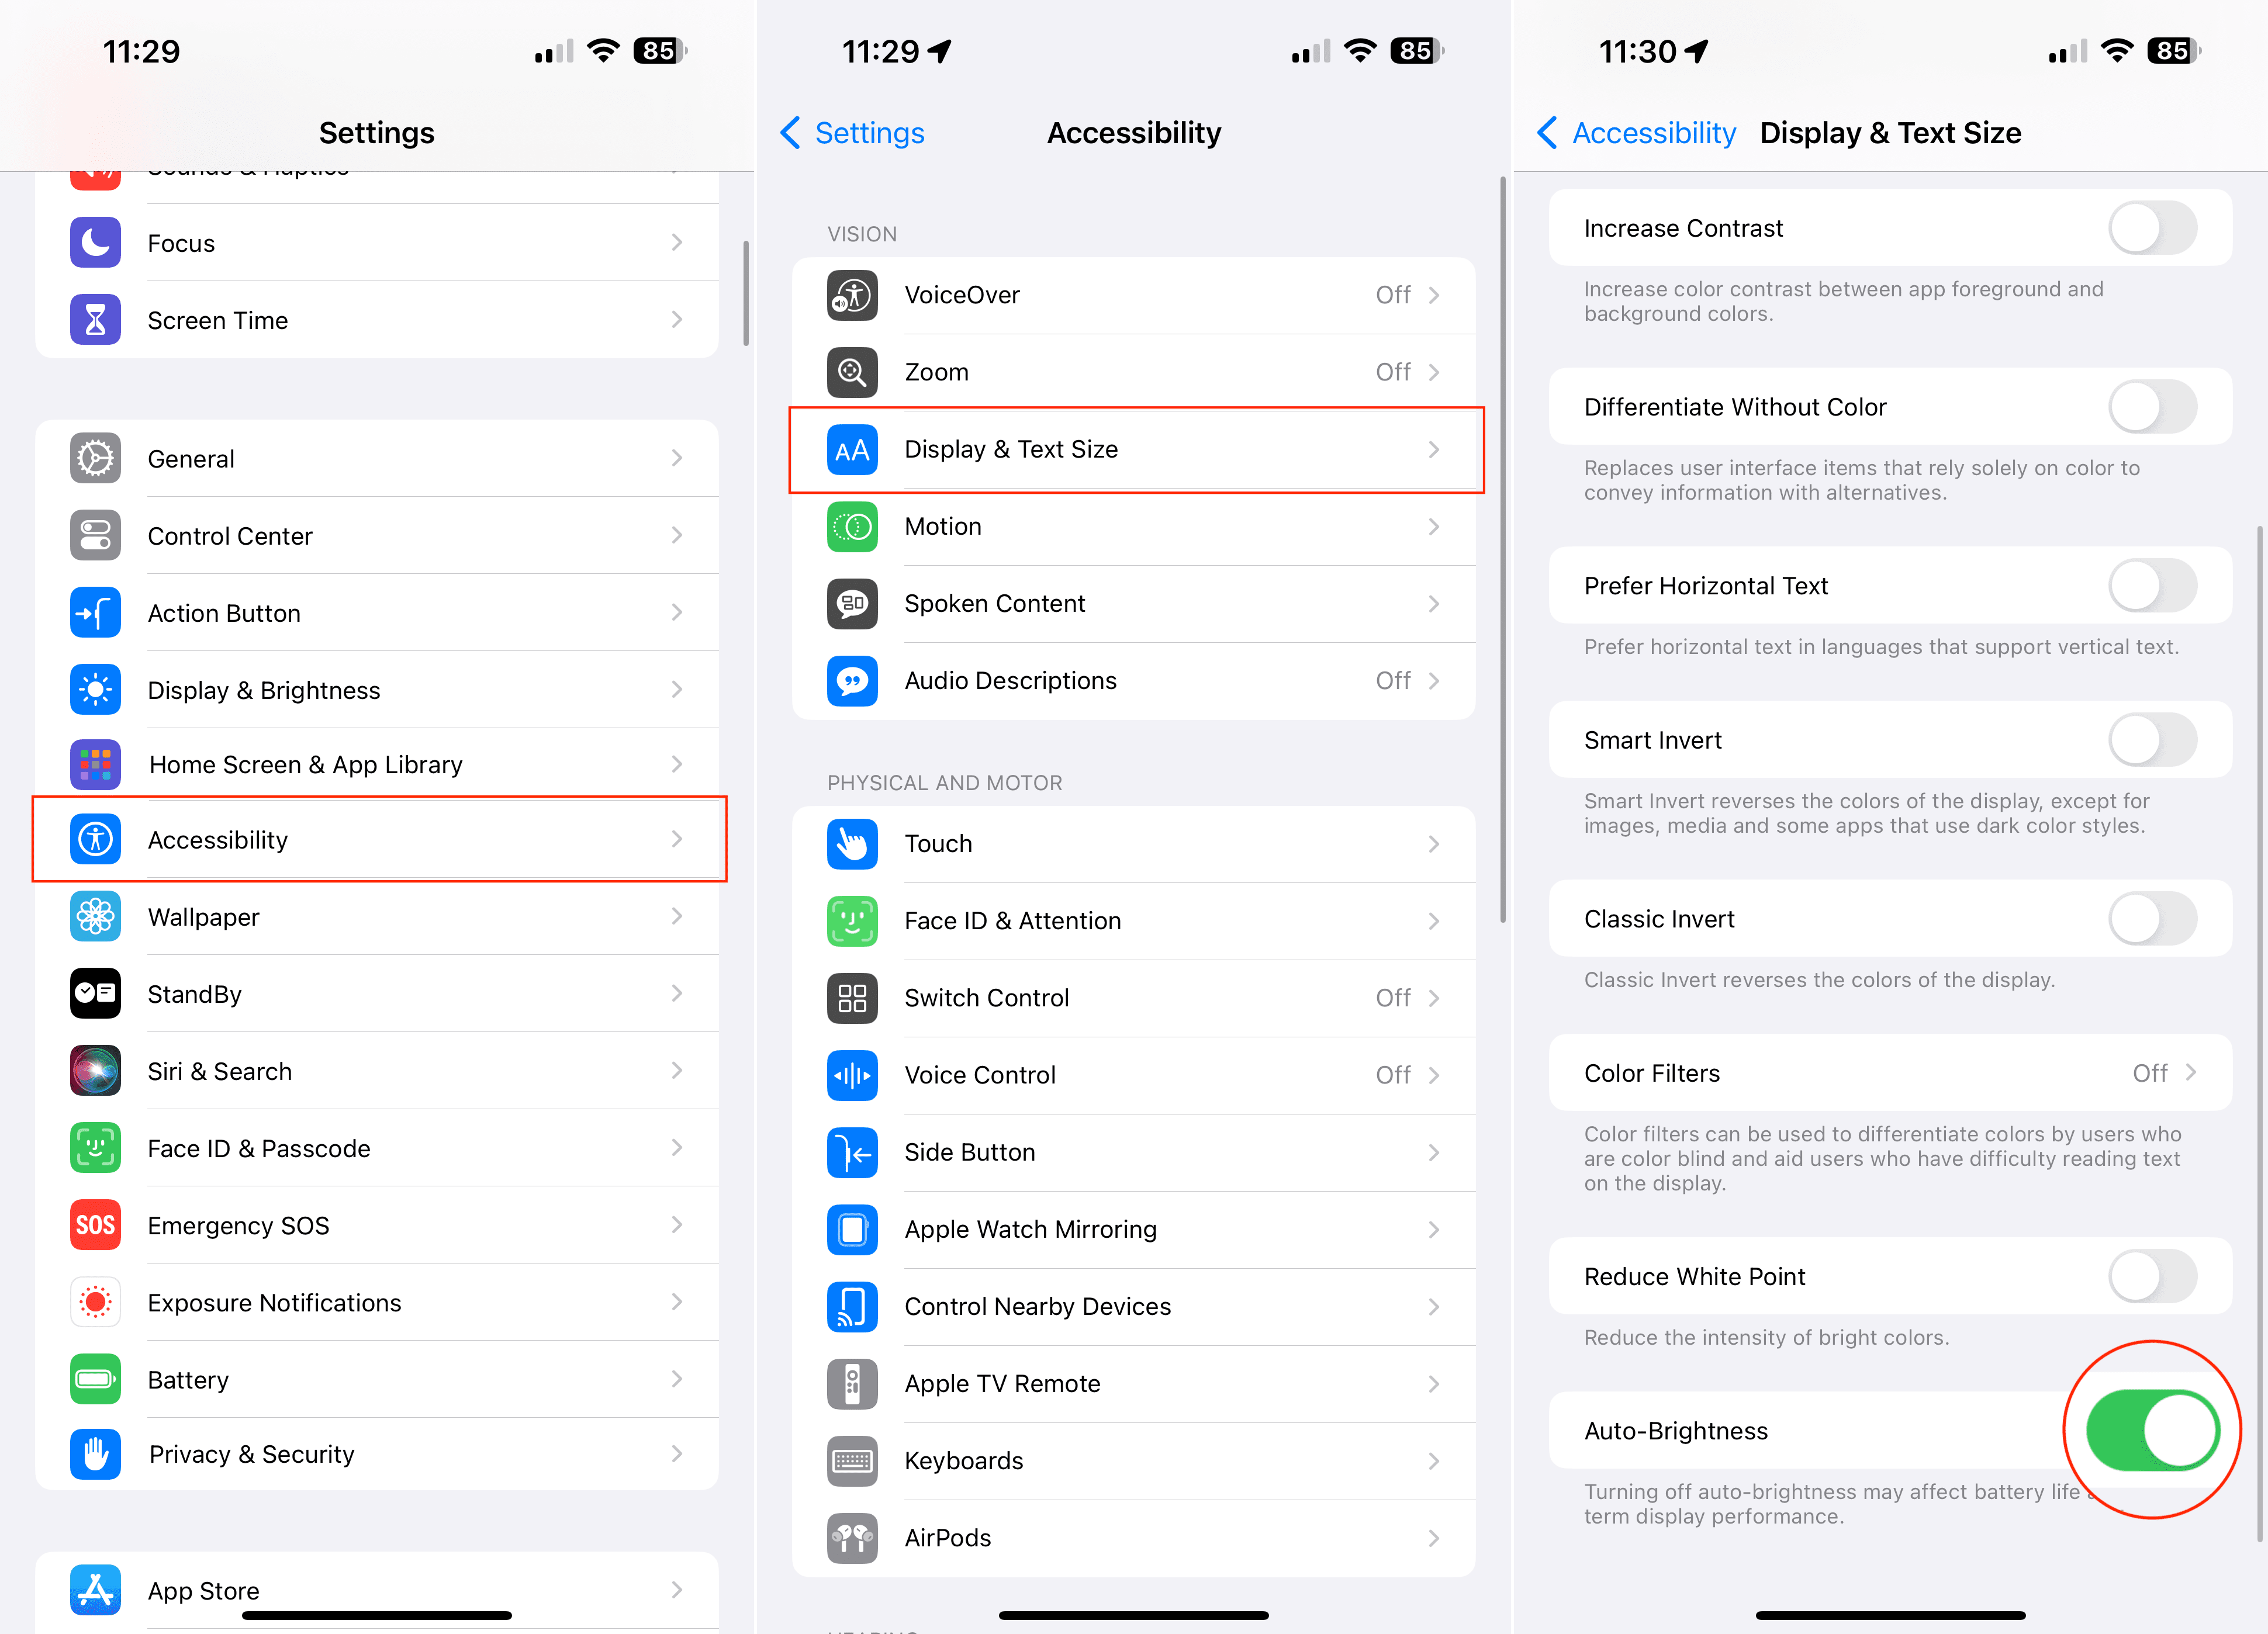 How to extend your iPhone battery life - Turn off Auto-Brightness